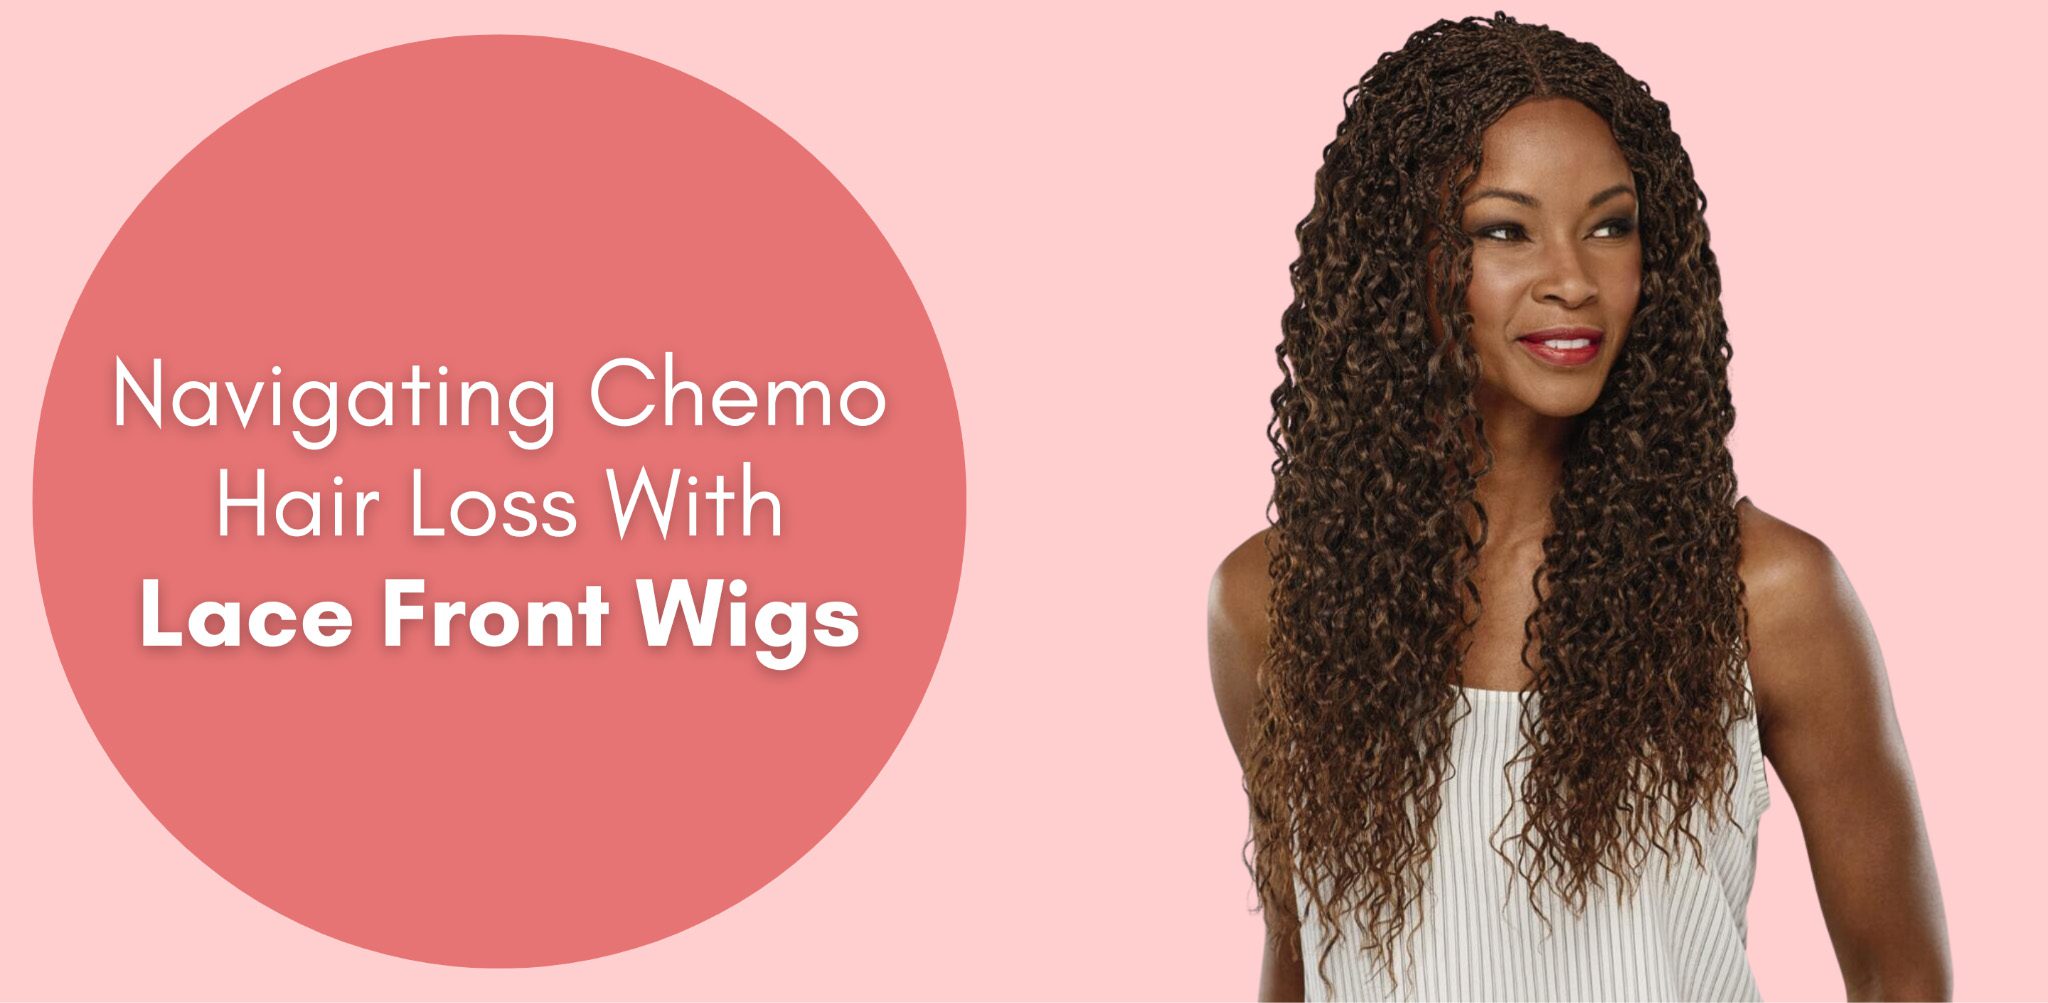 Navigating Chemo Hair Loss With Lace Front Wigs